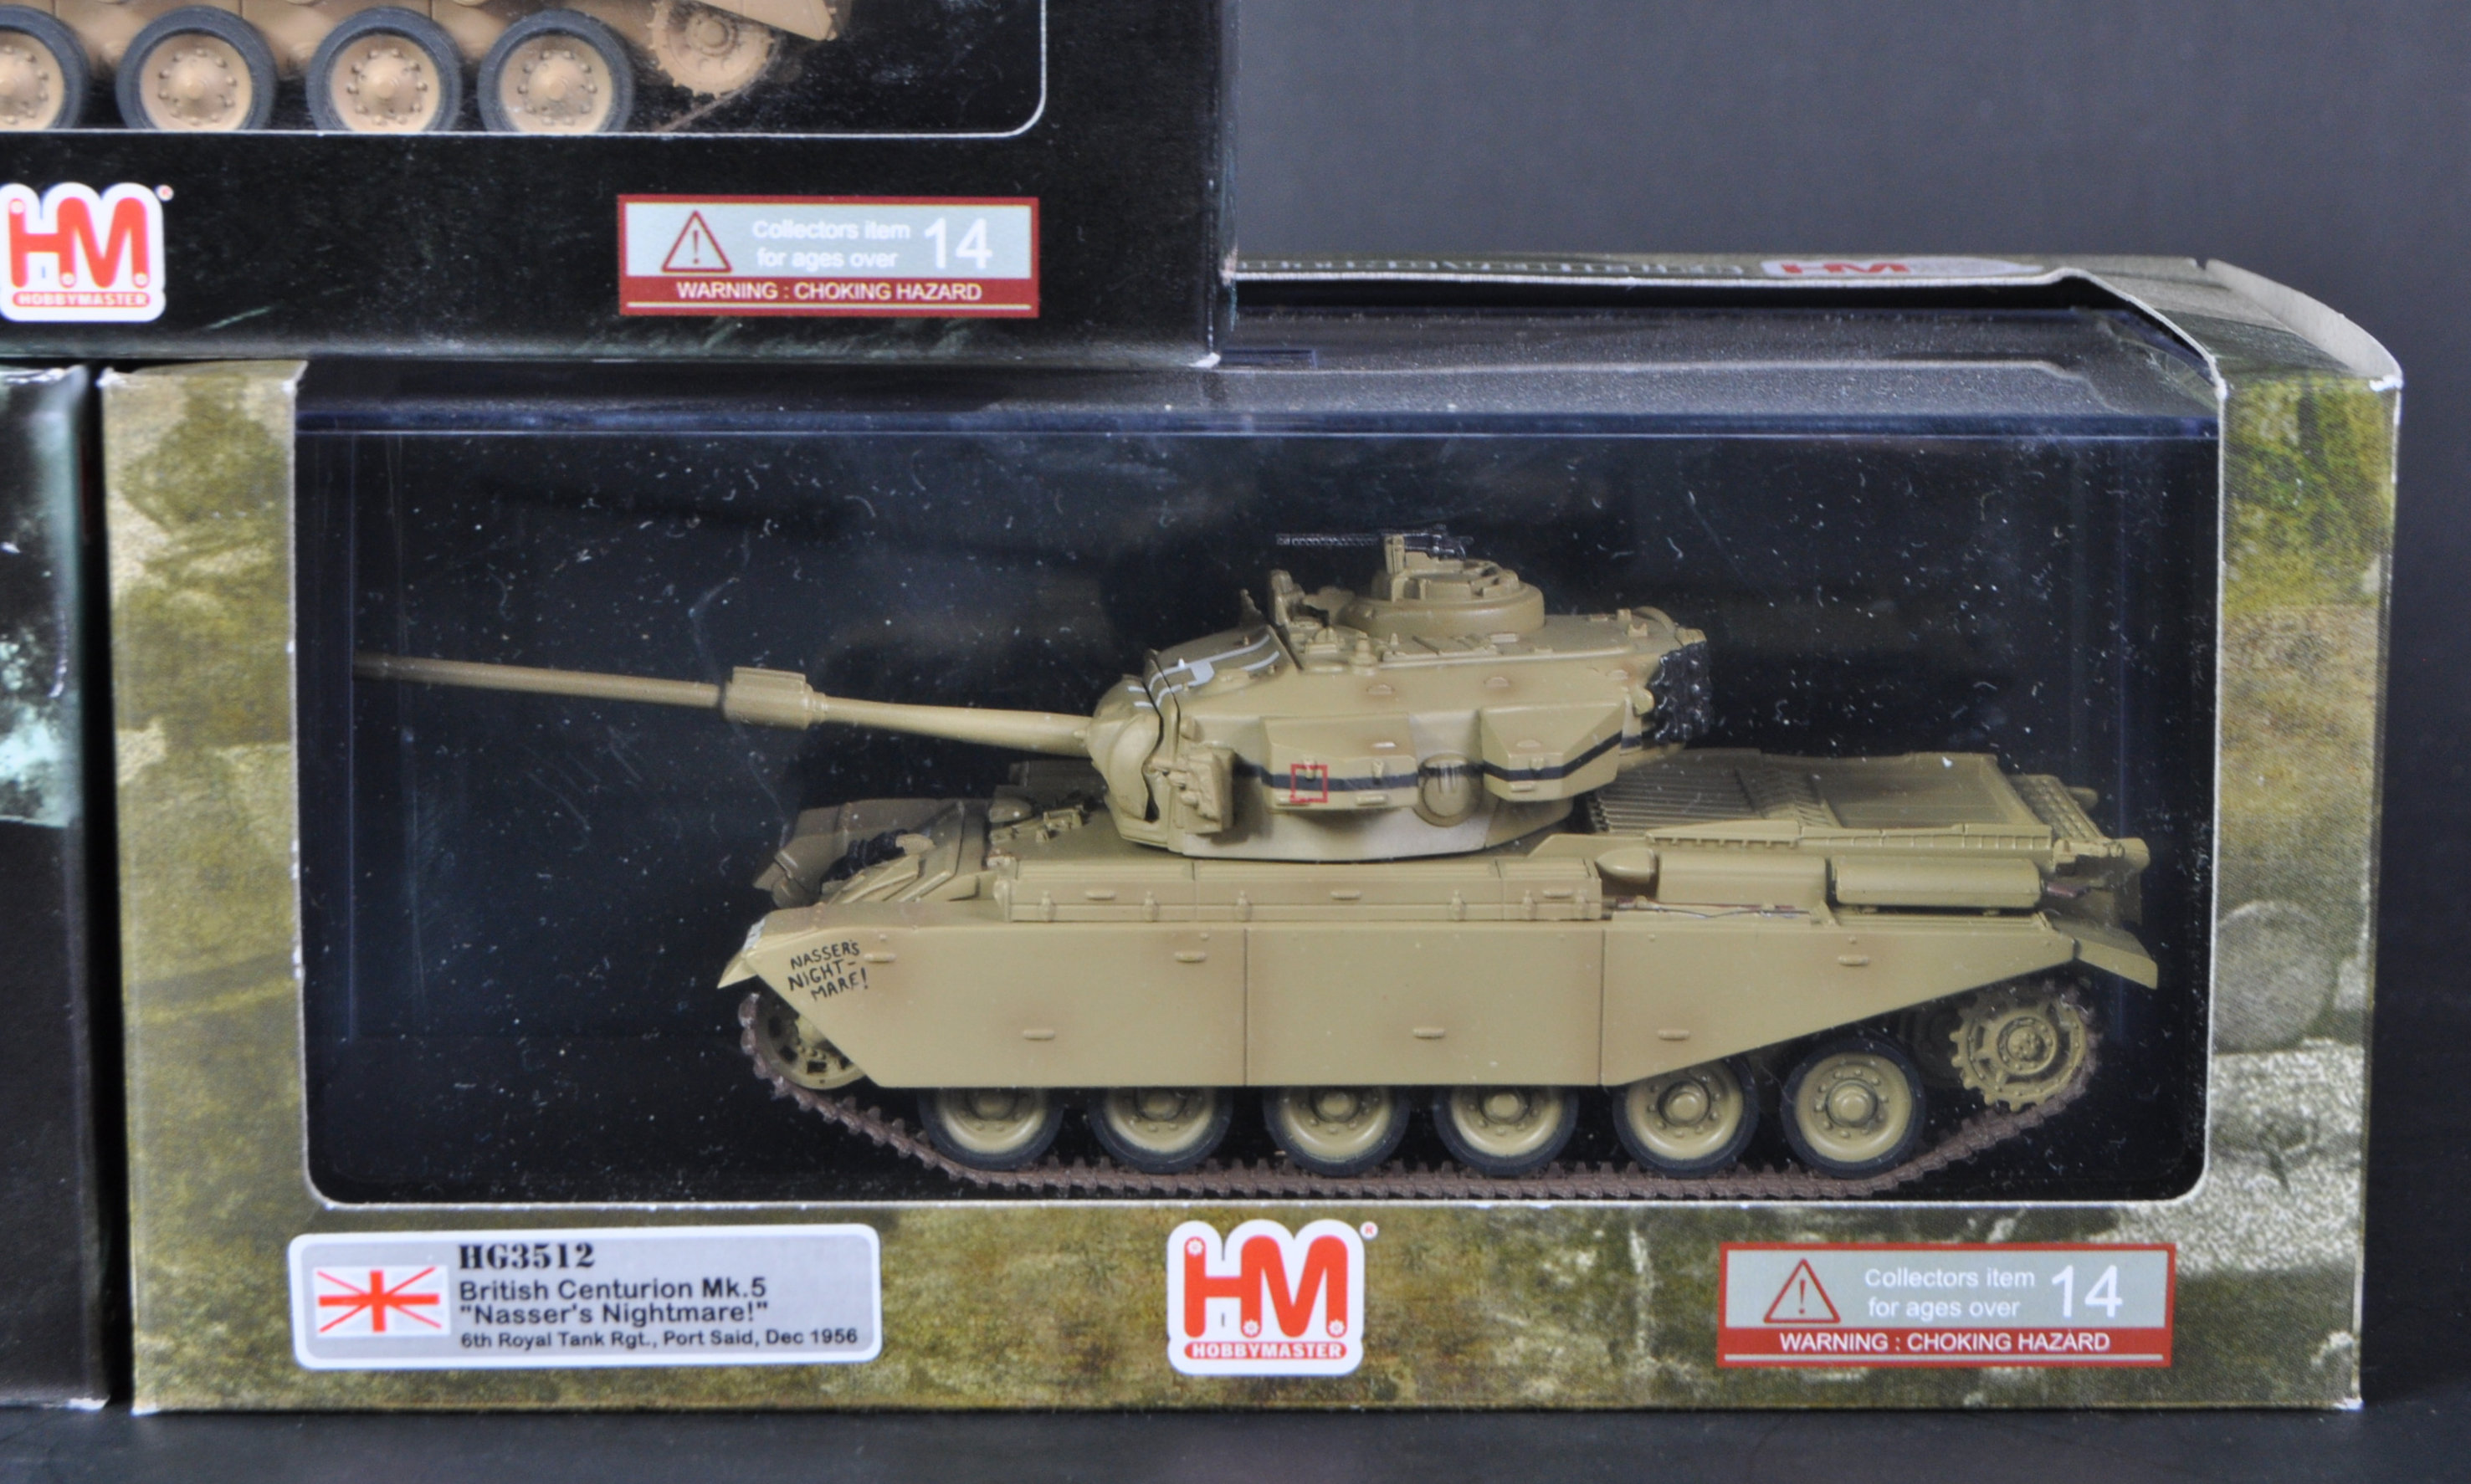 COLLECTION OF X5 HOBBY MASTERS DIECAST MODEL TANKS - Image 4 of 7